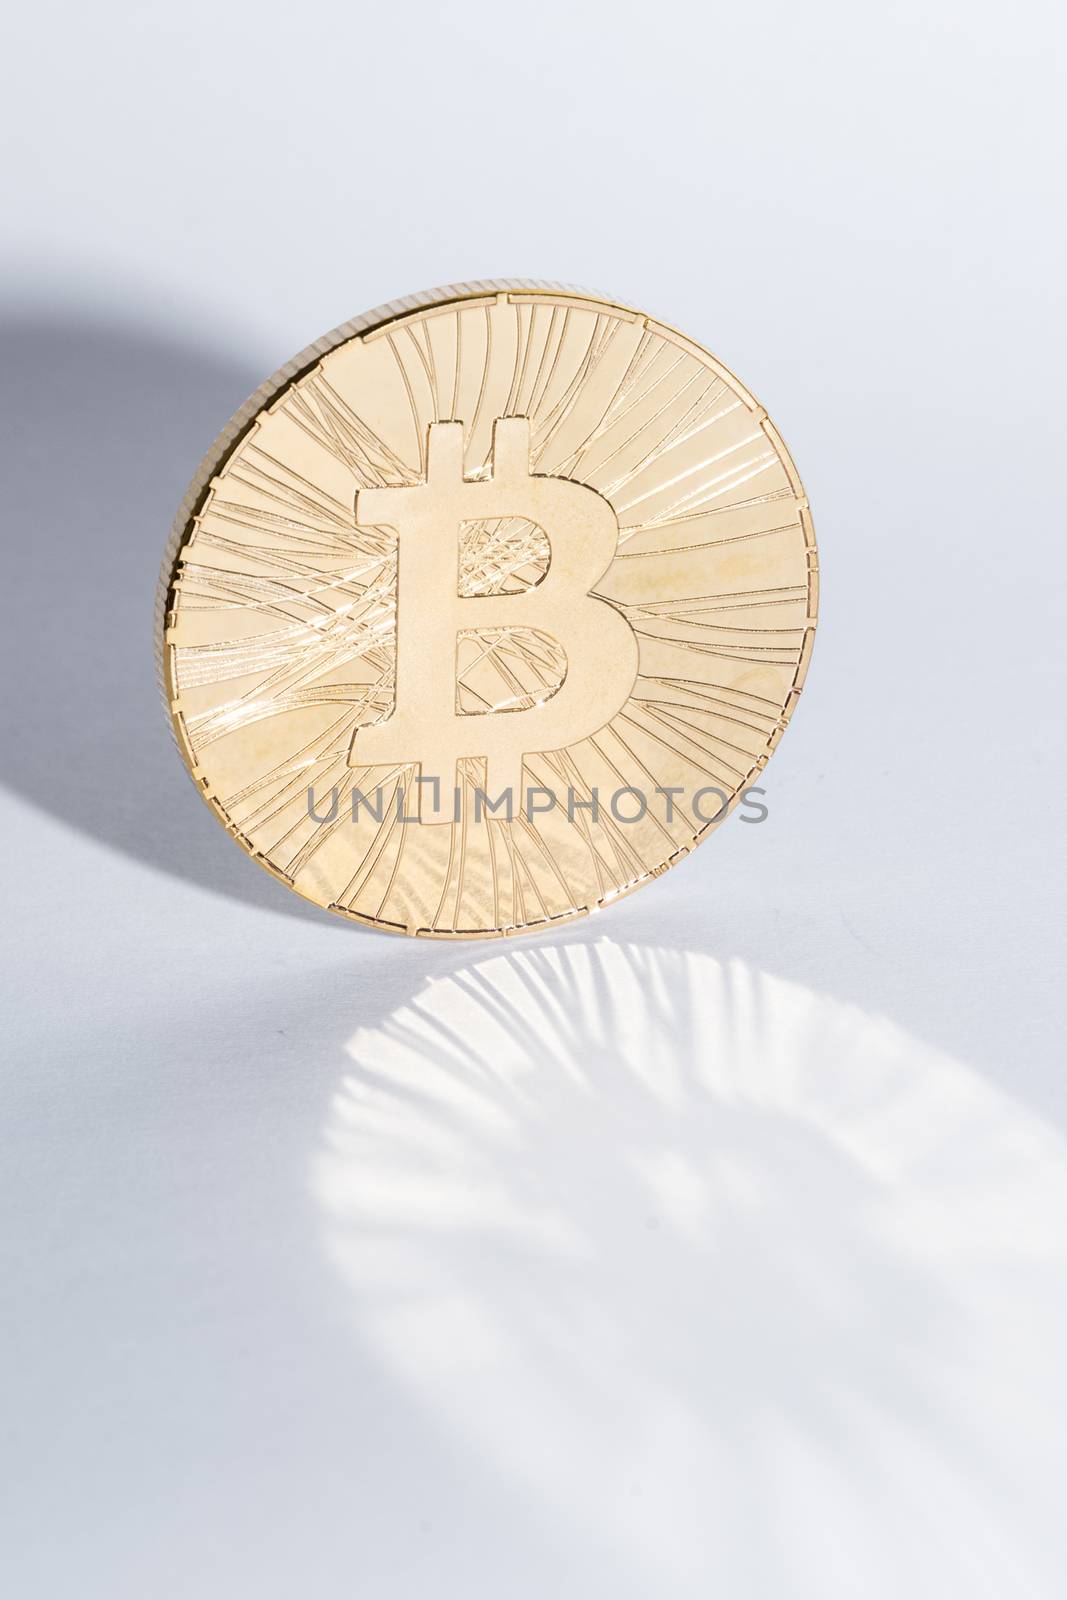 Bitcoin krypto currency golden coin symbolic money with bitcoin sign